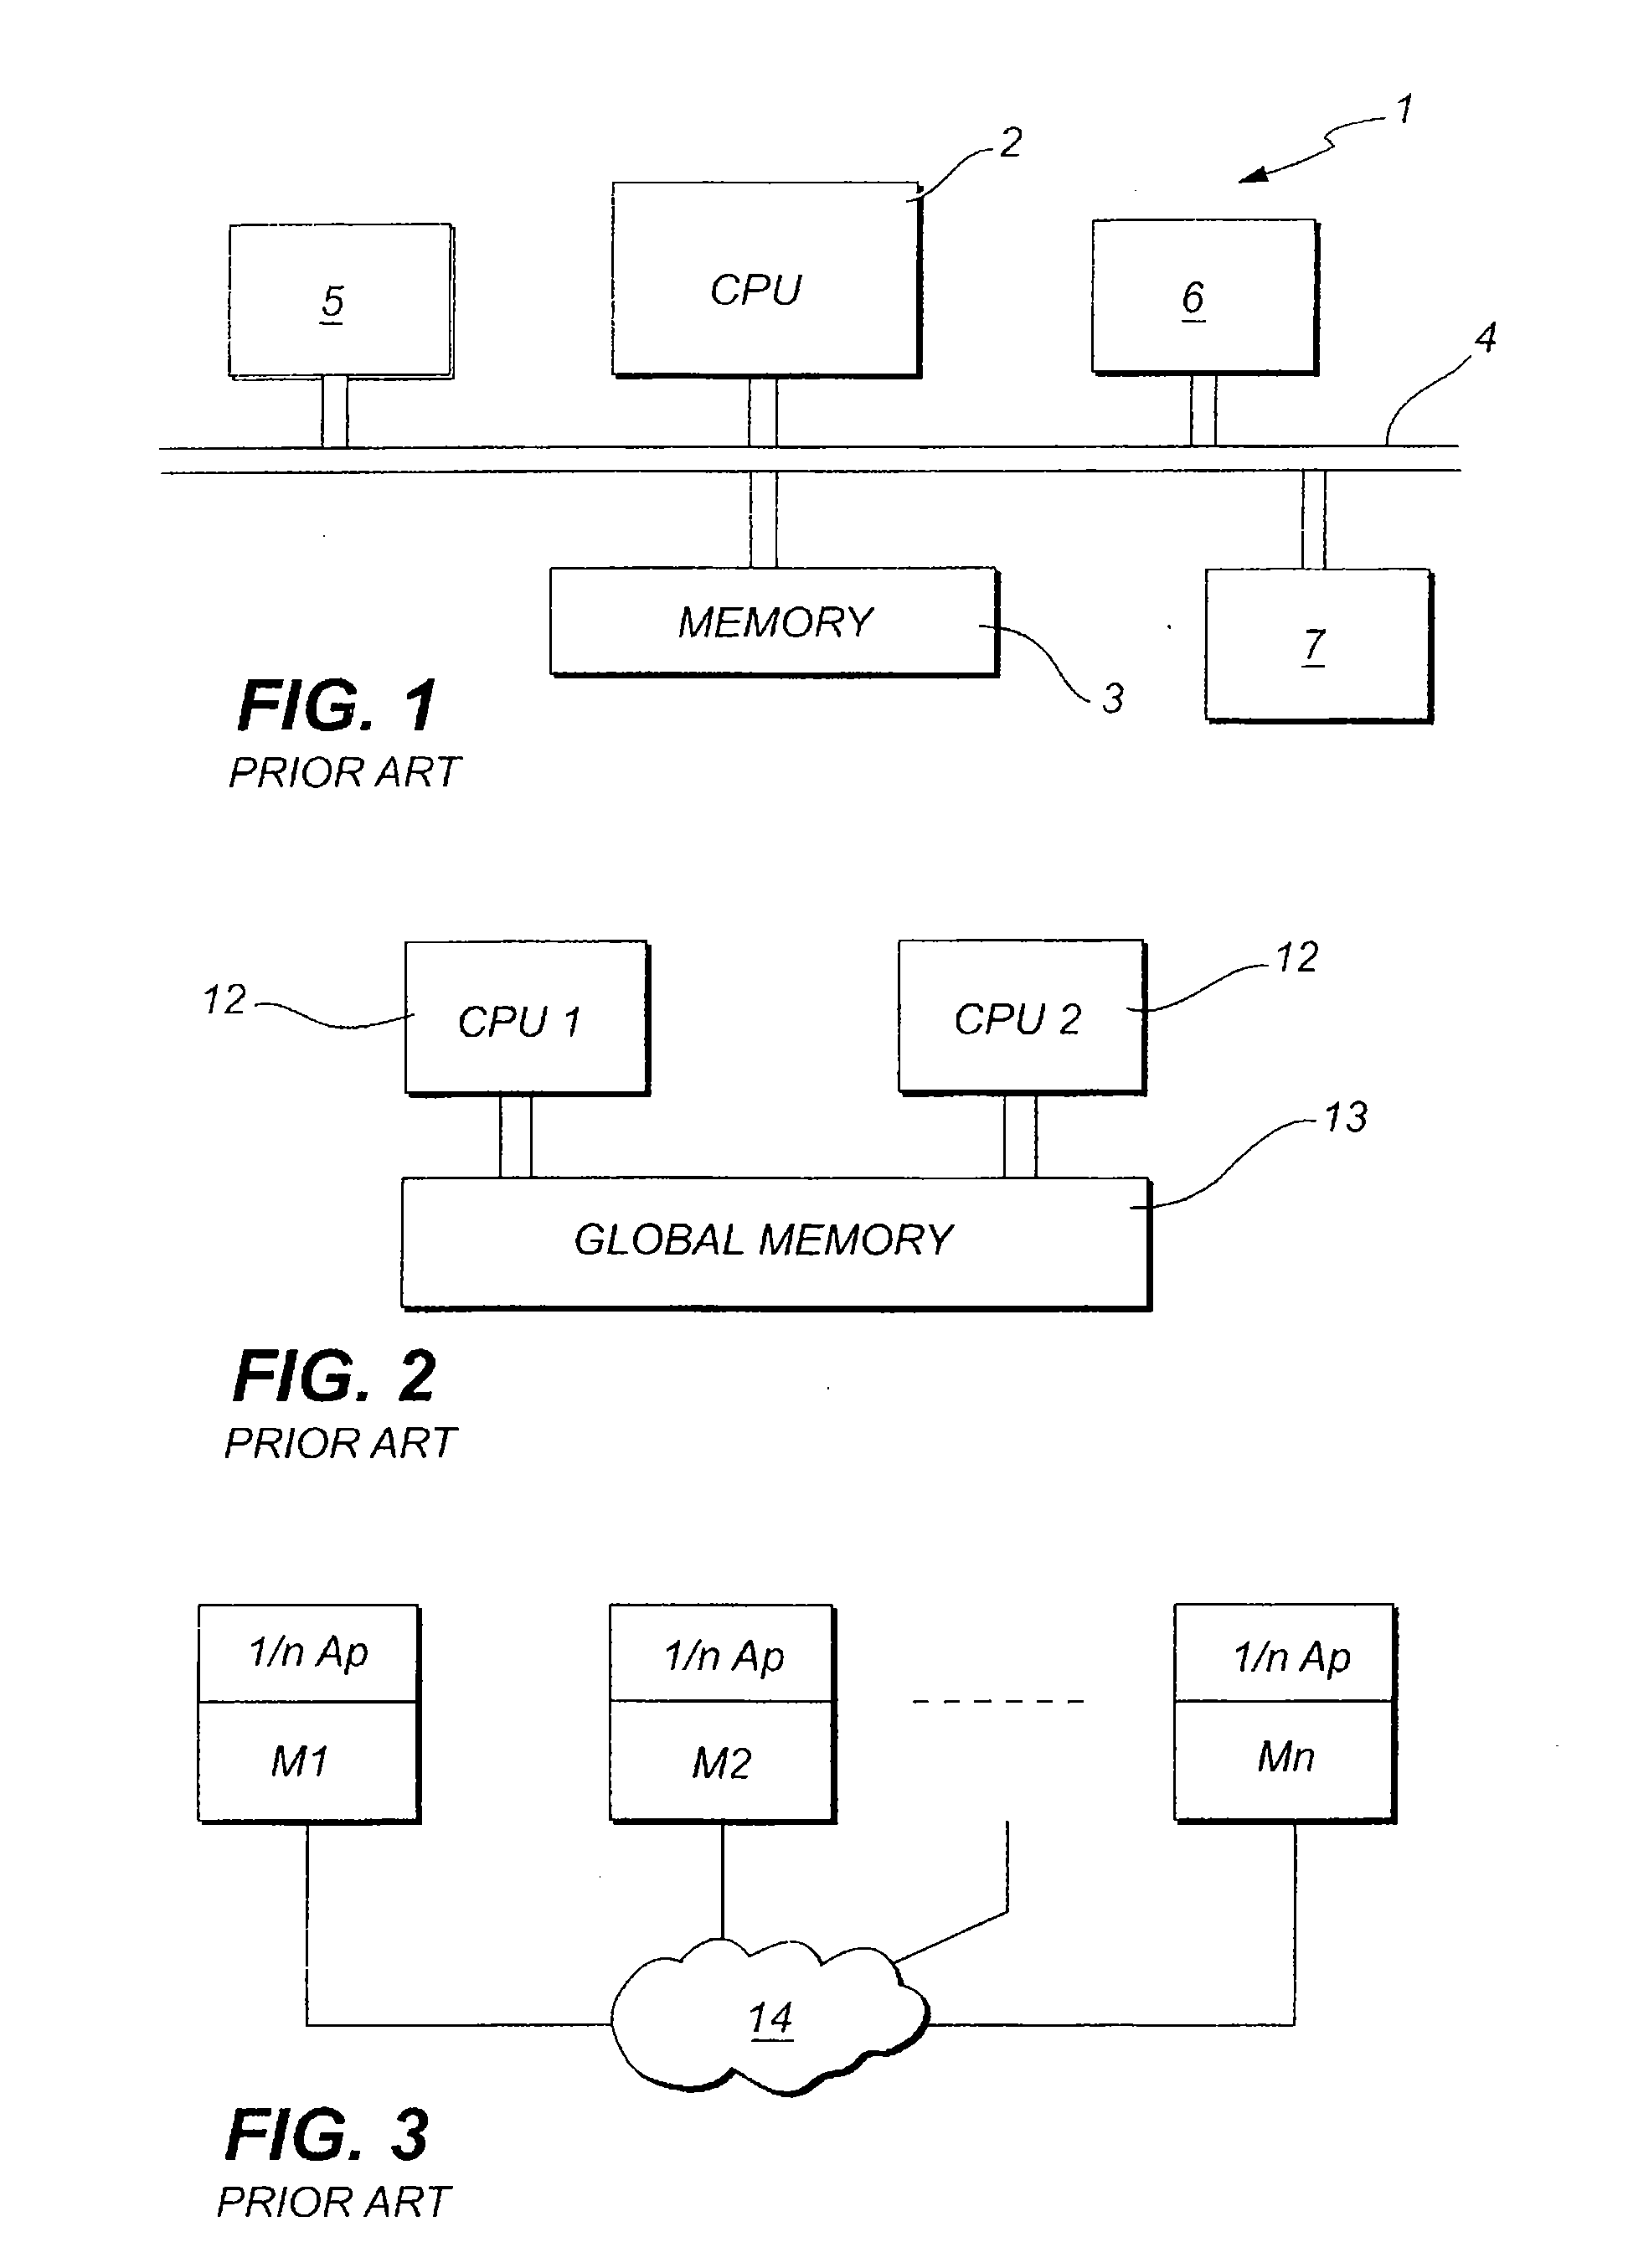 Computer Architecture And Method Of Operation for Multi-Computer Distributed Processing Having Redundant Array Of Independent Systems With Replicated Memory And Code Striping